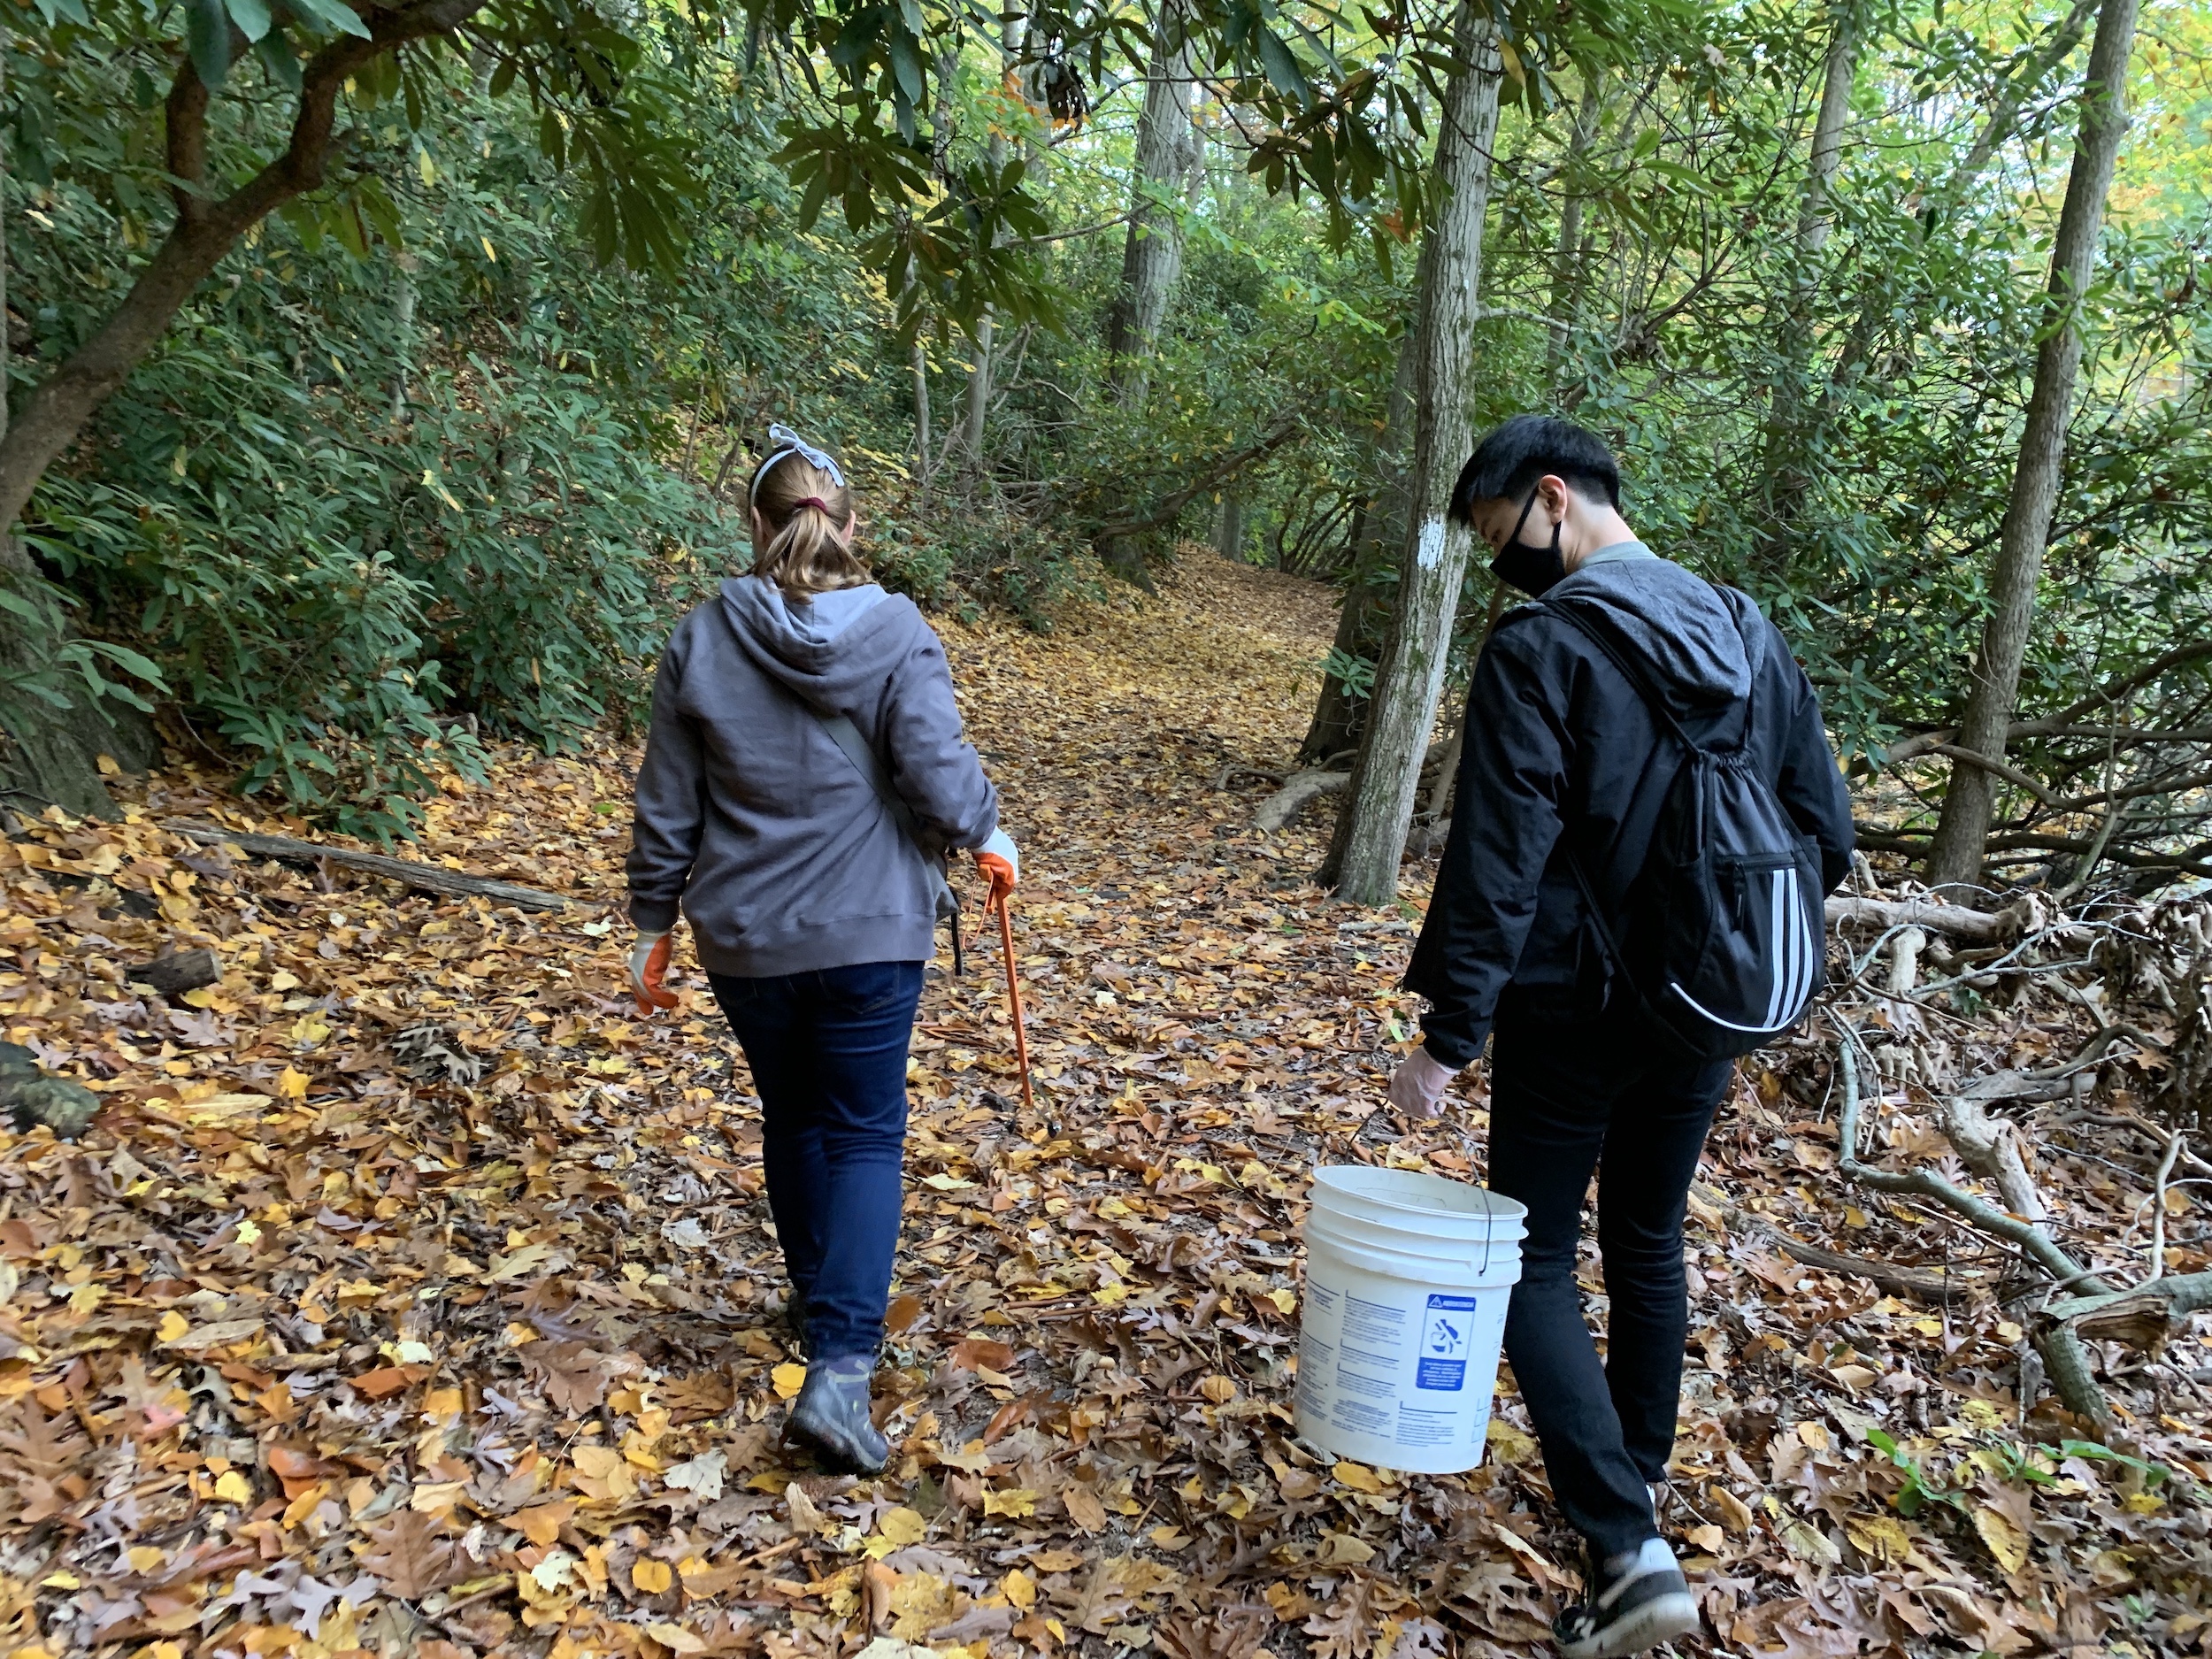 Members of the New Haven Climate Movement took their efforts to the deepest parts of Edgewood Park. (photo by Yanni Tragellis)